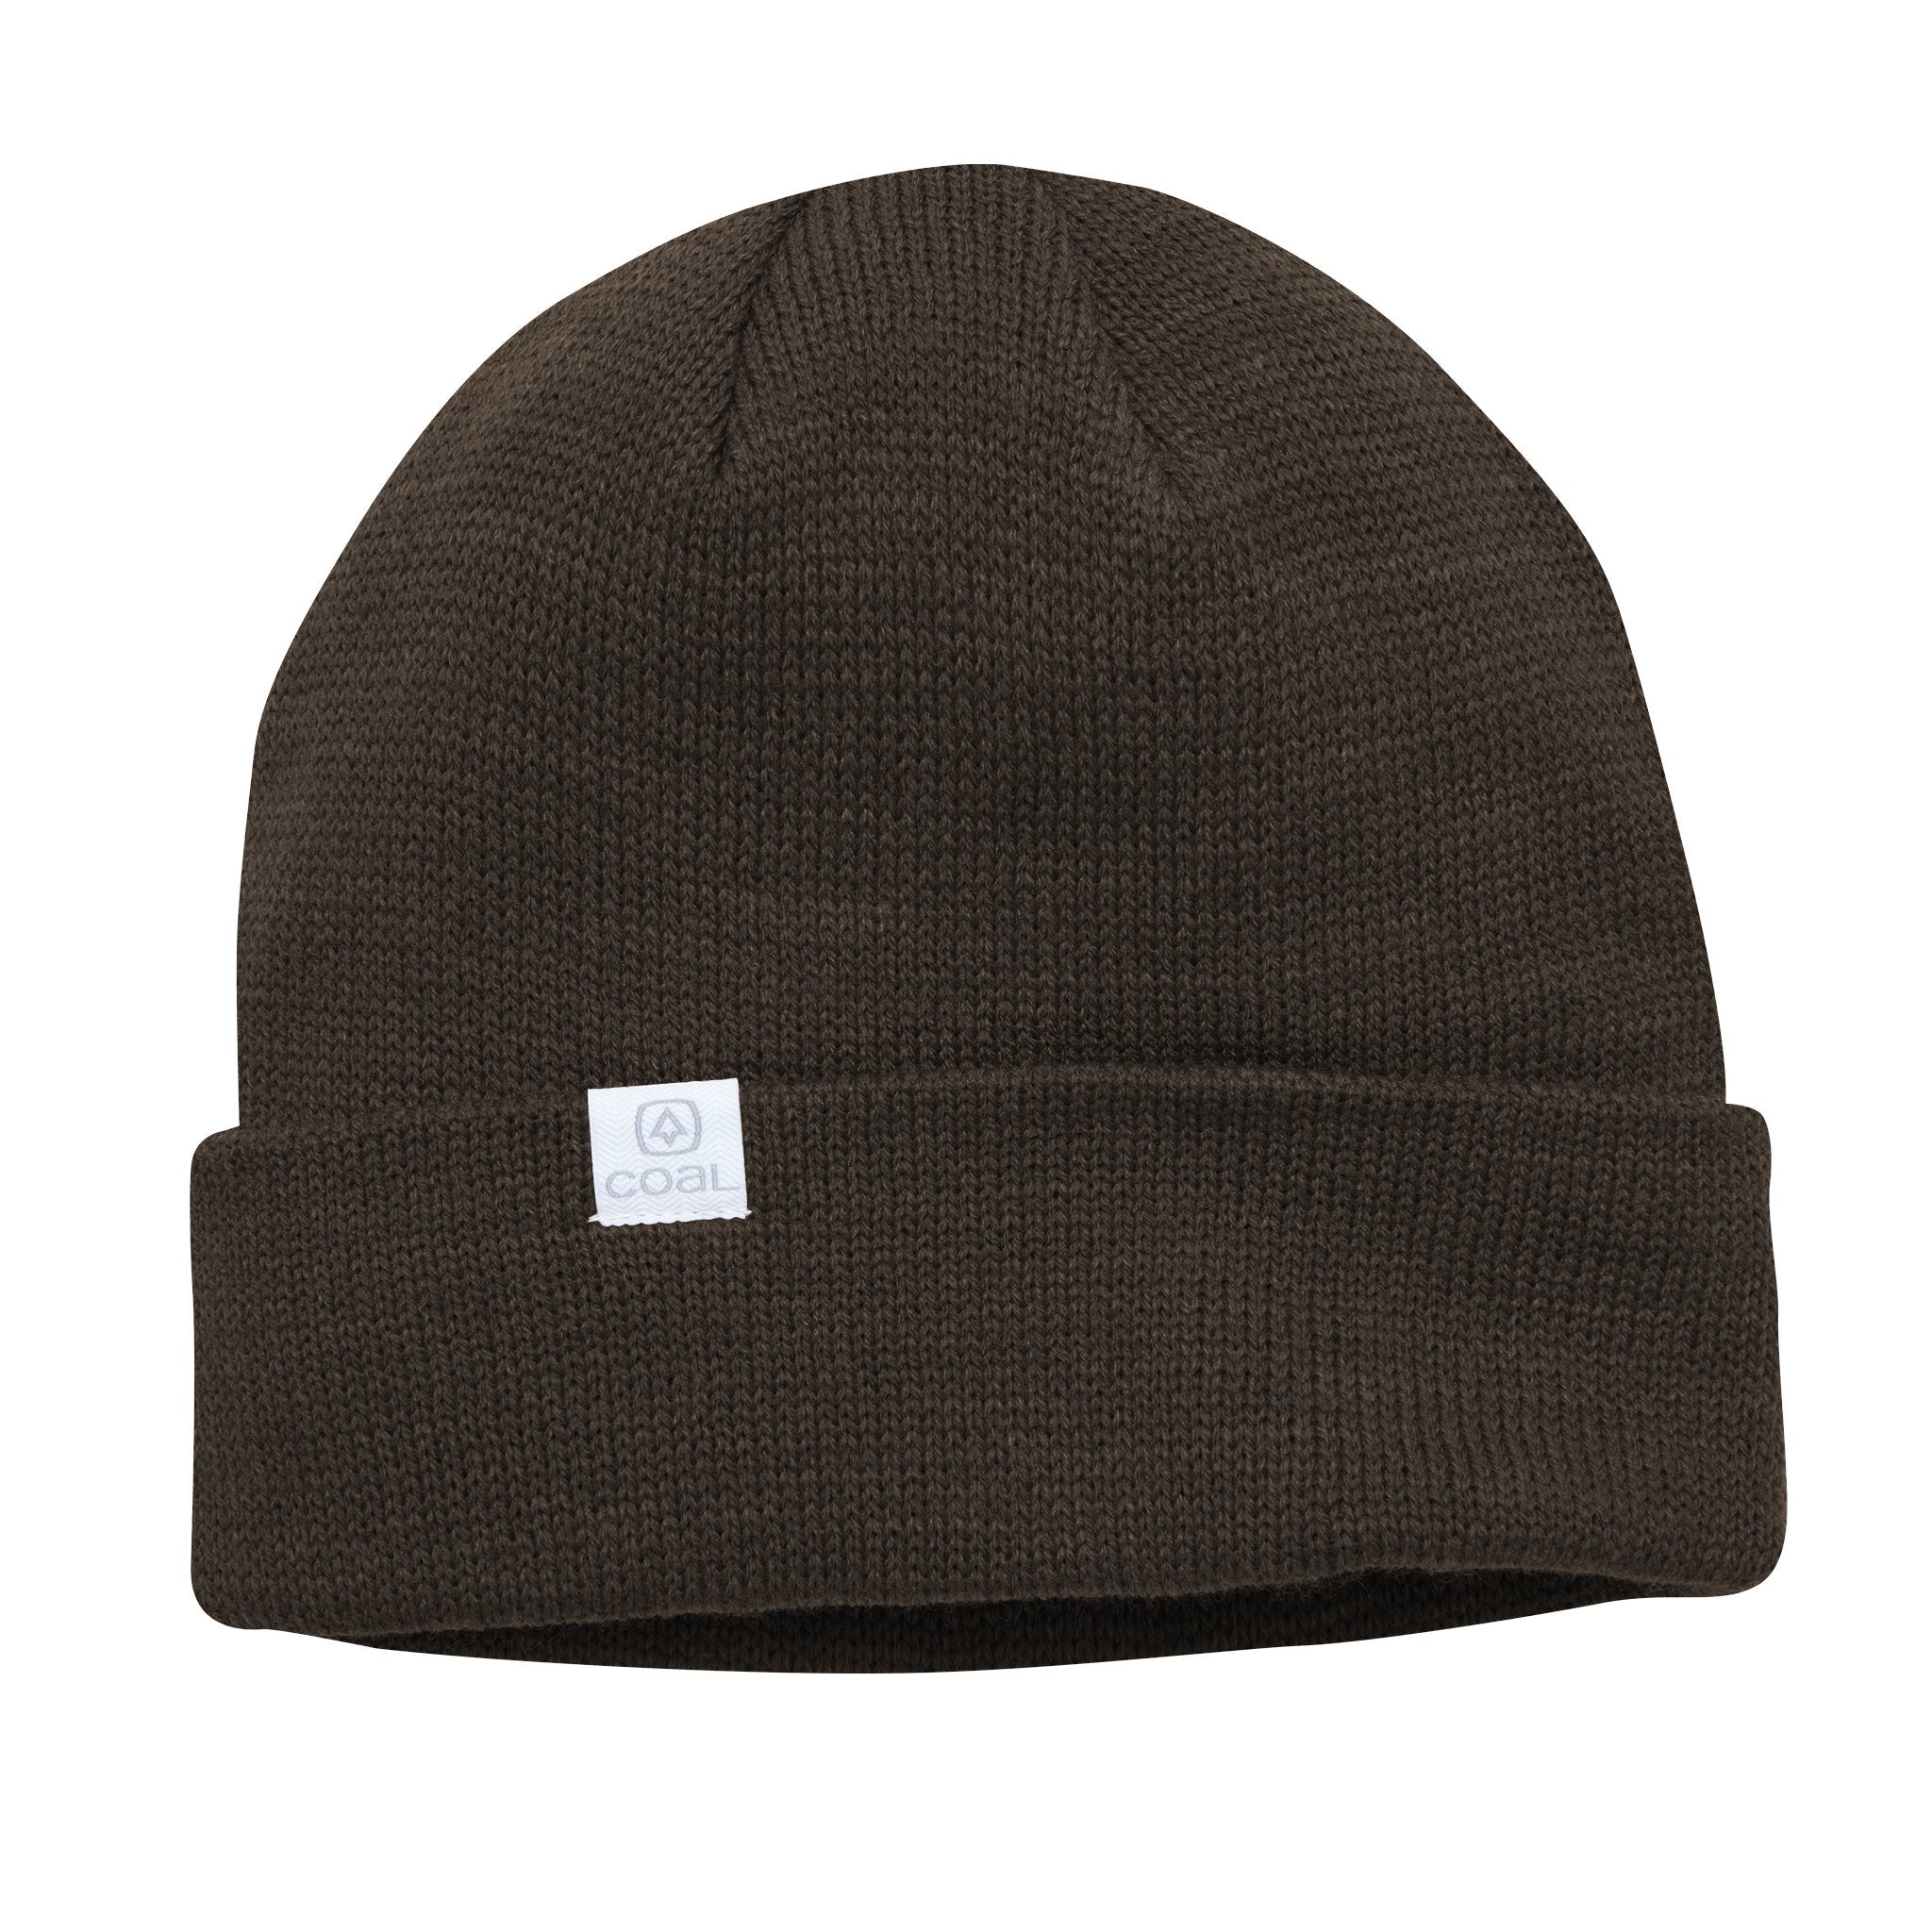 Coal The FLT Recycled Polylana Knit Beanie - Brown